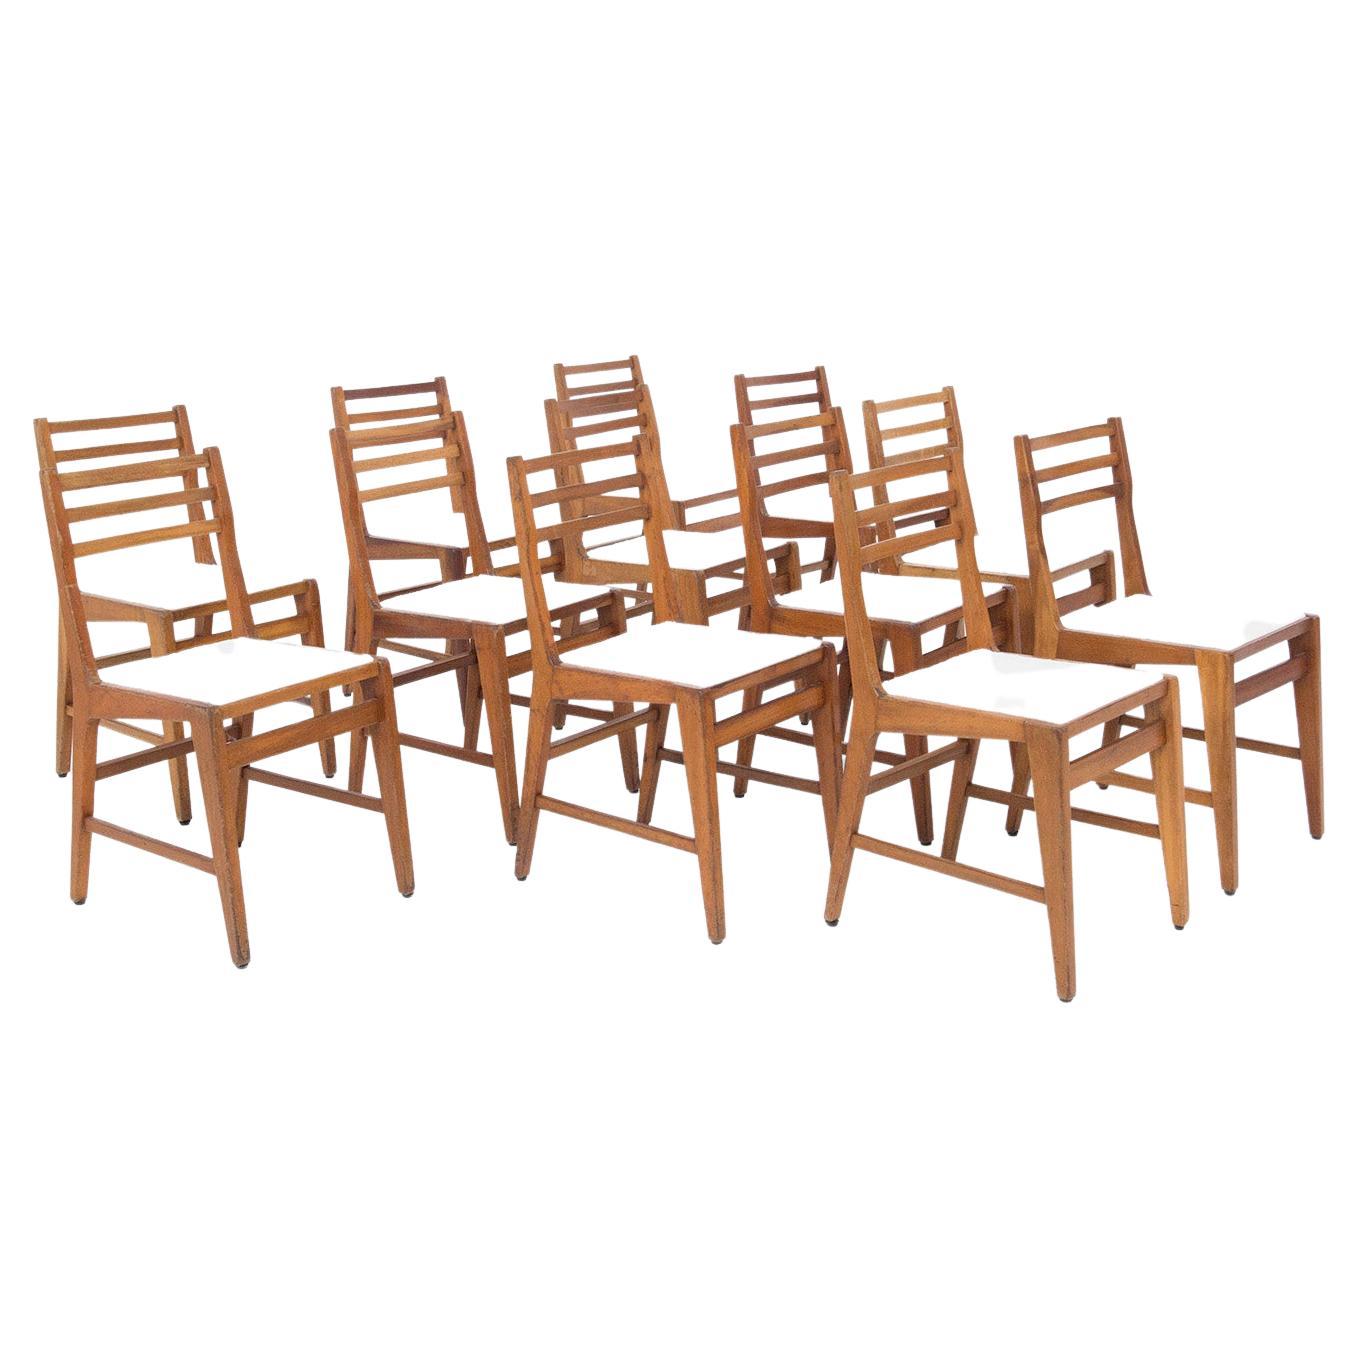 Bbpr Set of 12 Wooden Mid-Century Chairs in Bouclé For Sale